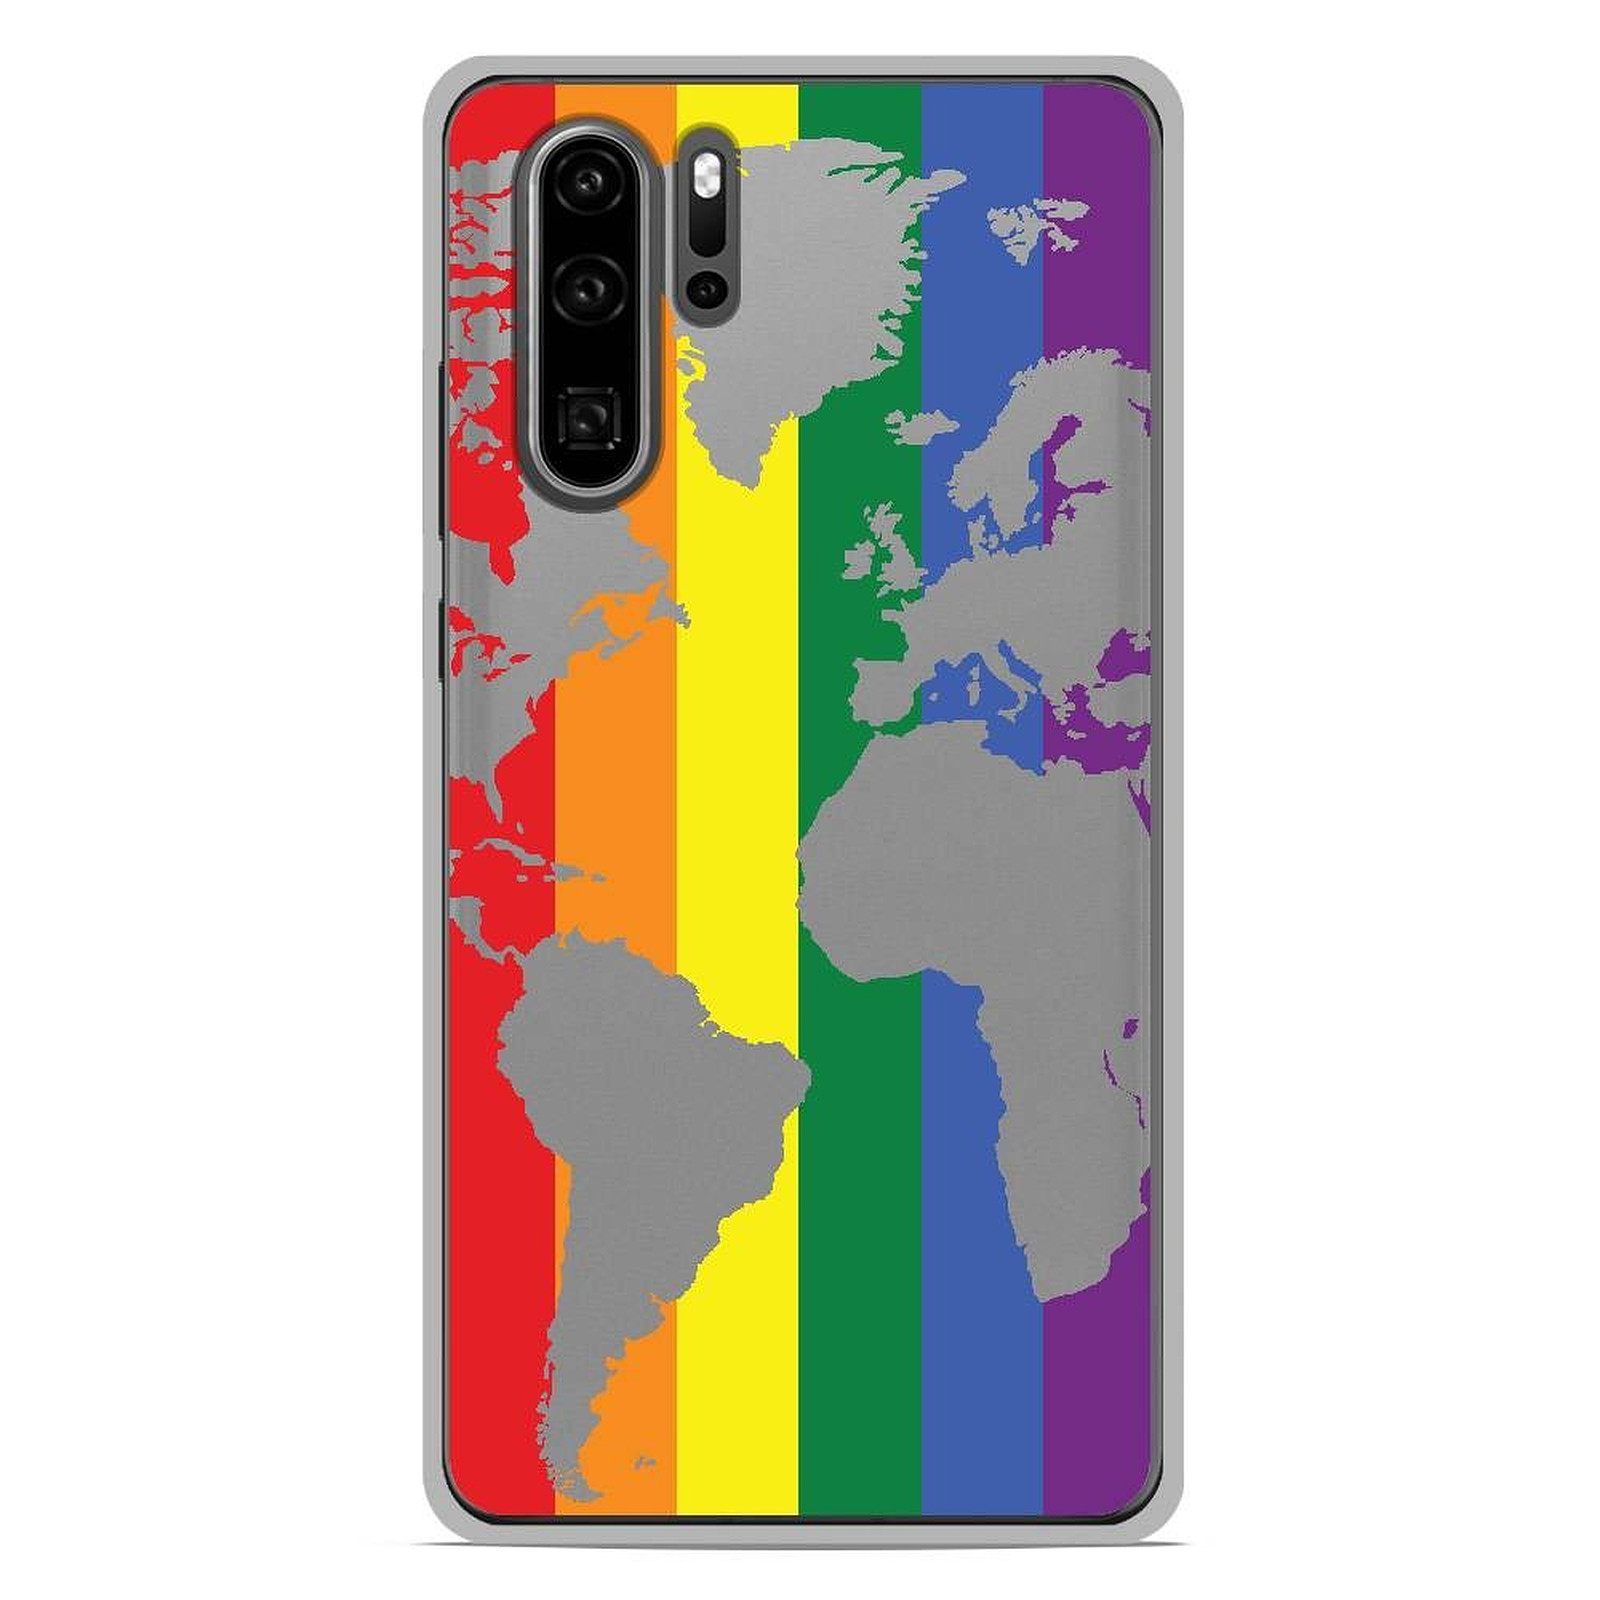 1001 Coques Coque silicone gel Huawei P30 Pro motif Map LGBT - Coque telephone 1001Coques